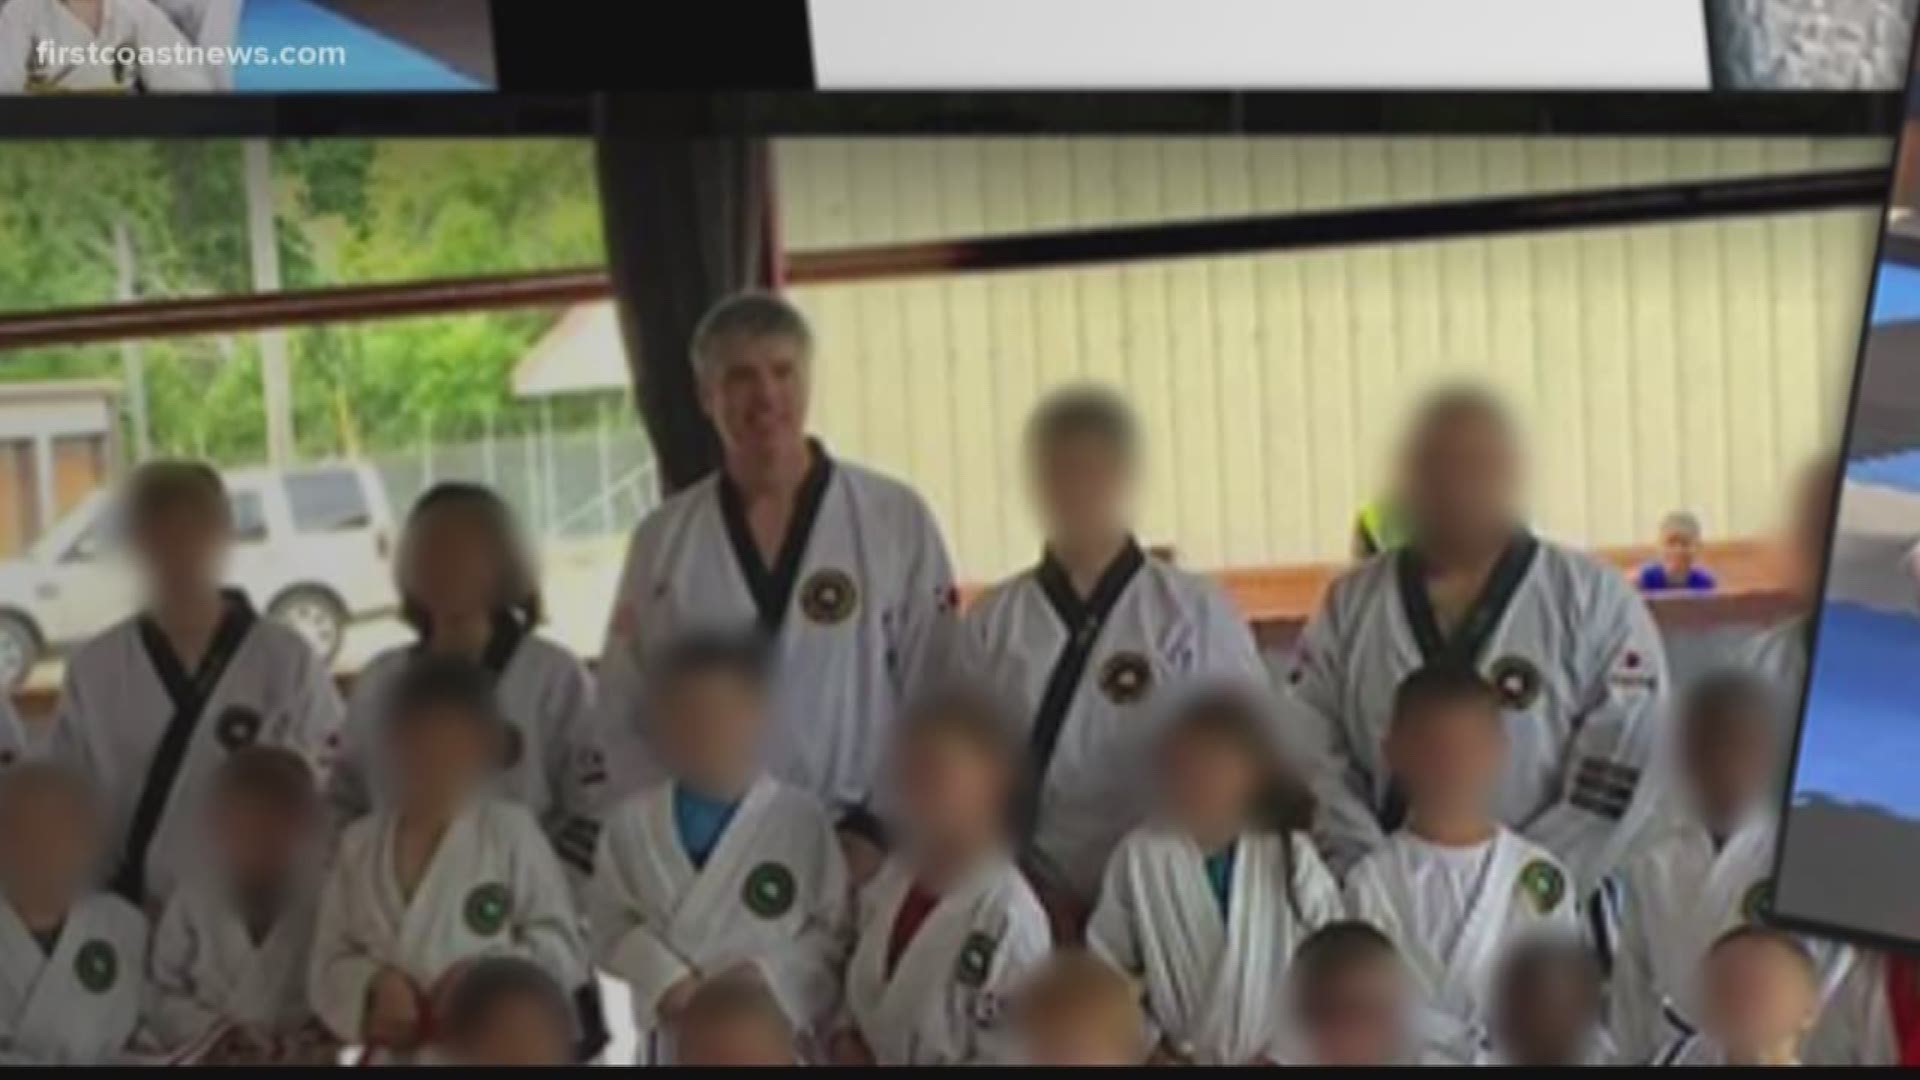 Despite years of allegations against multiple instructors, local karate federation resists implementing child protections